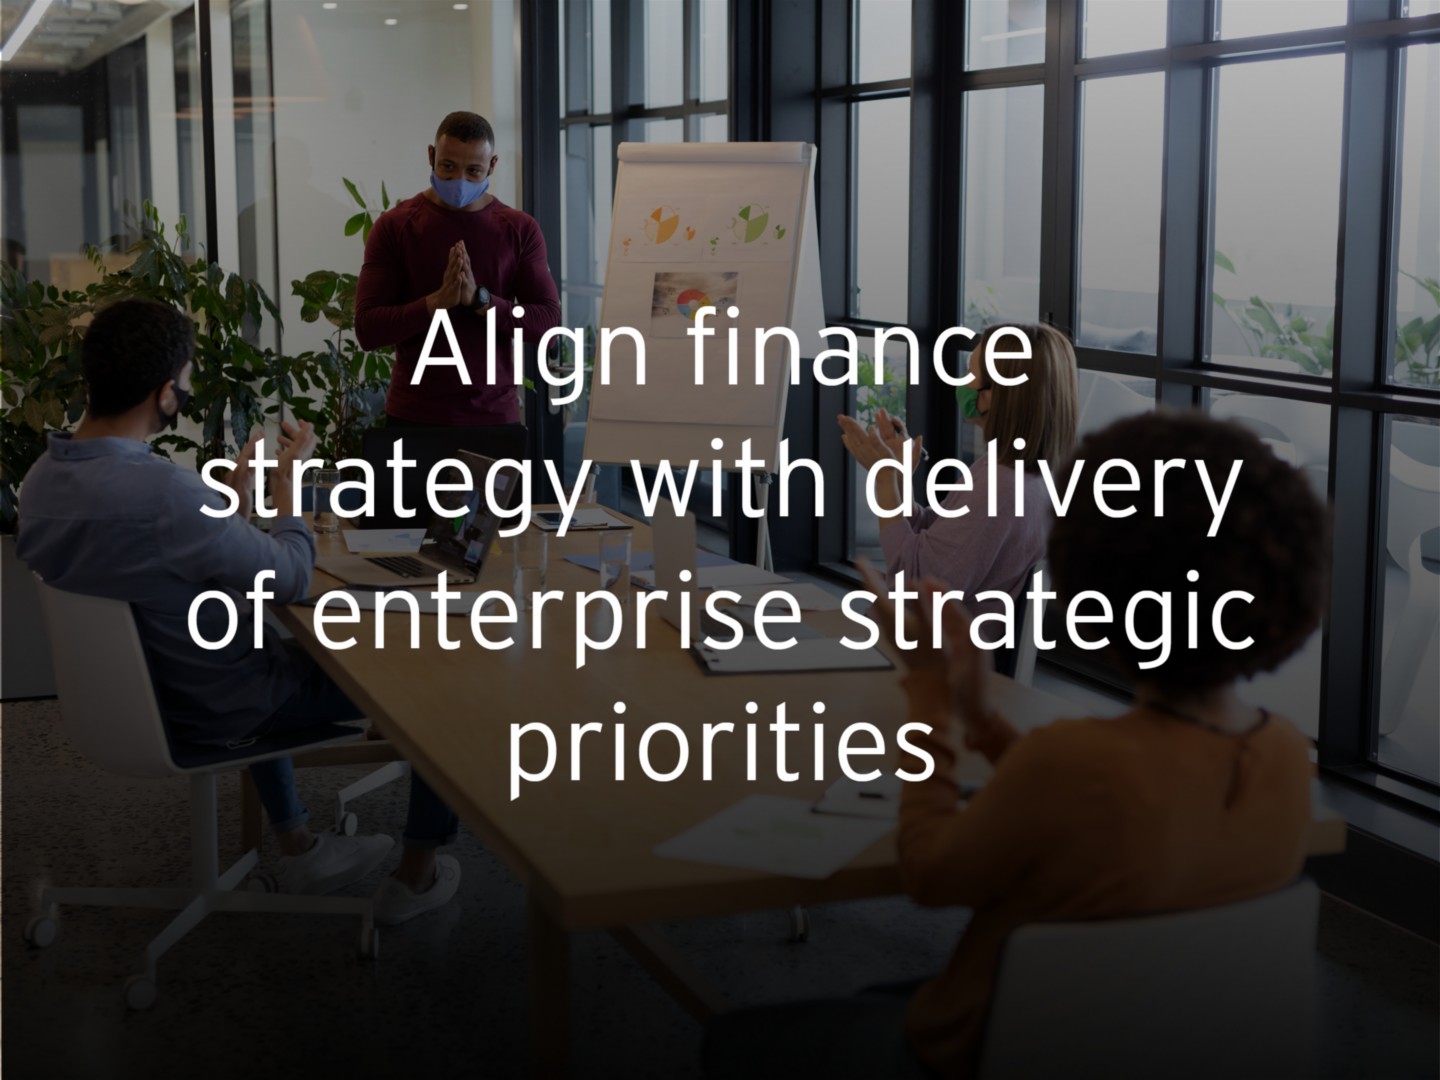 Align finance strategy with delivery of enterprise strategic priorities